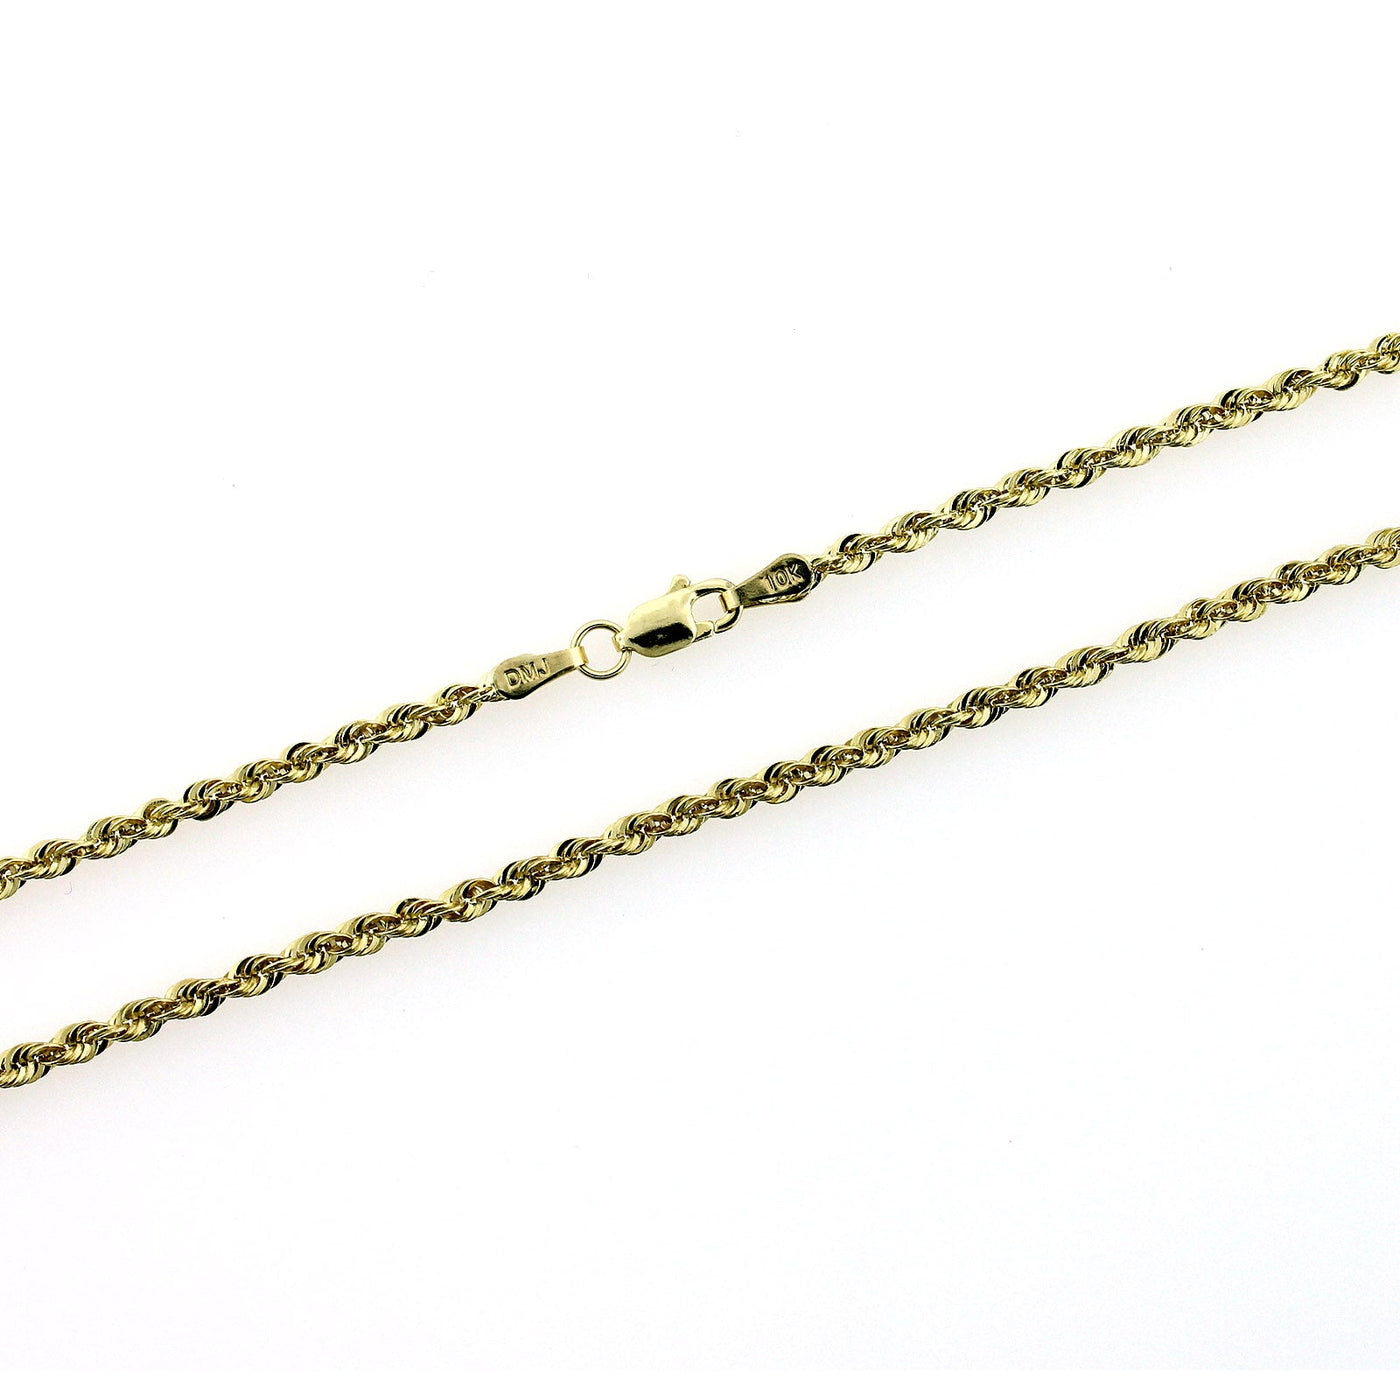 10K Yellow Gold Rope Chain Necklace 3MM 16" 18" 20" 22" 24" 26" 28" 30"